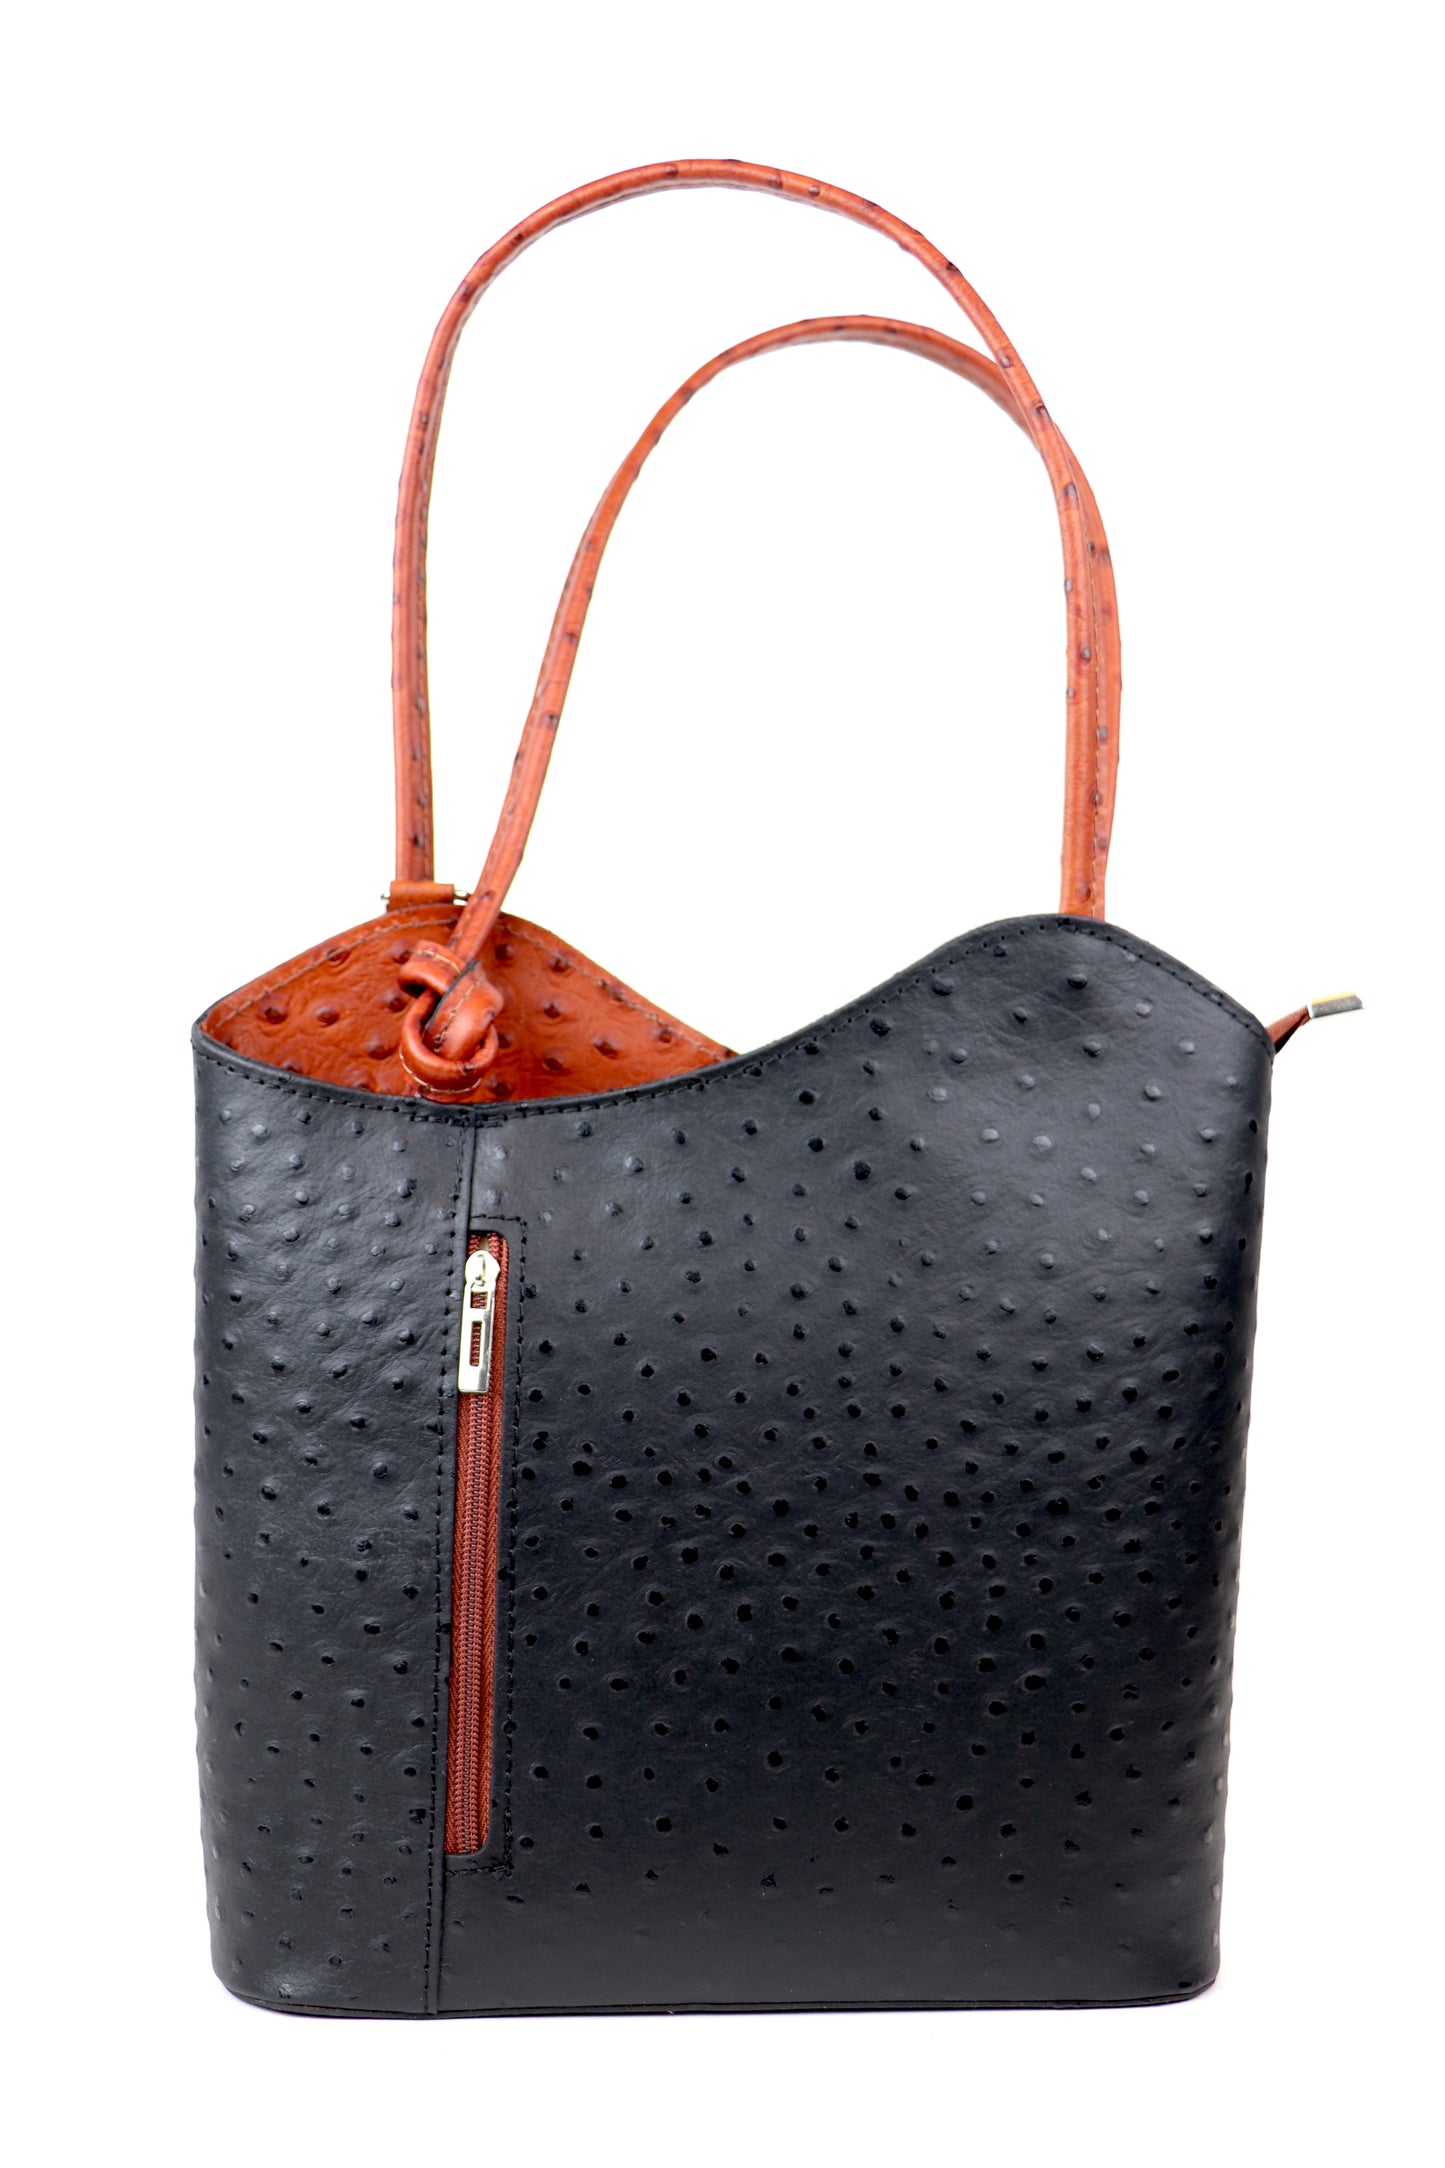 Two-Tone Ostrich Style Genuine Italian Leather Convertible Handbag and Backpack